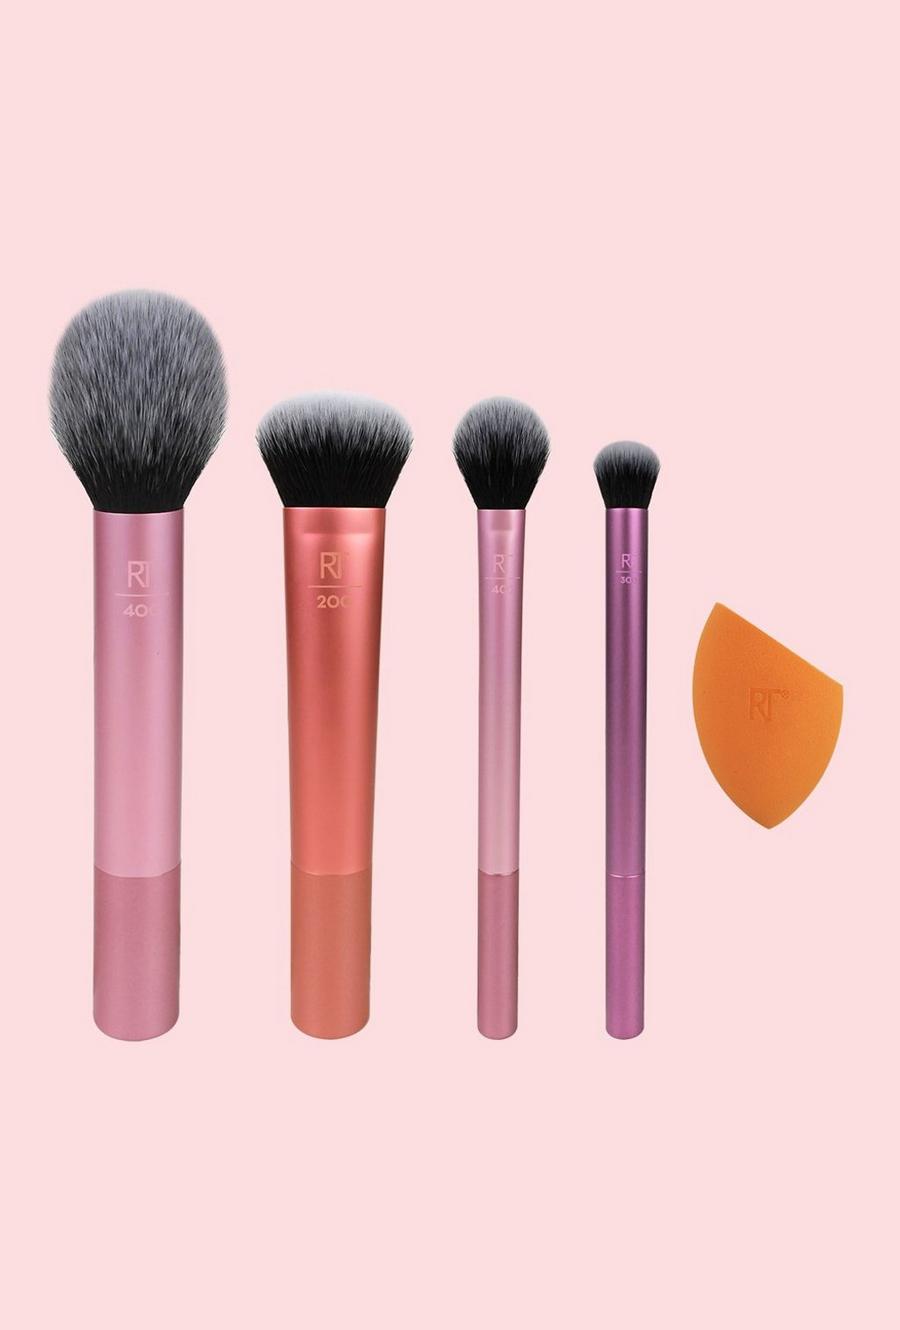 Multi Real Techniques Everyday Essentials Makeup Brush Kit